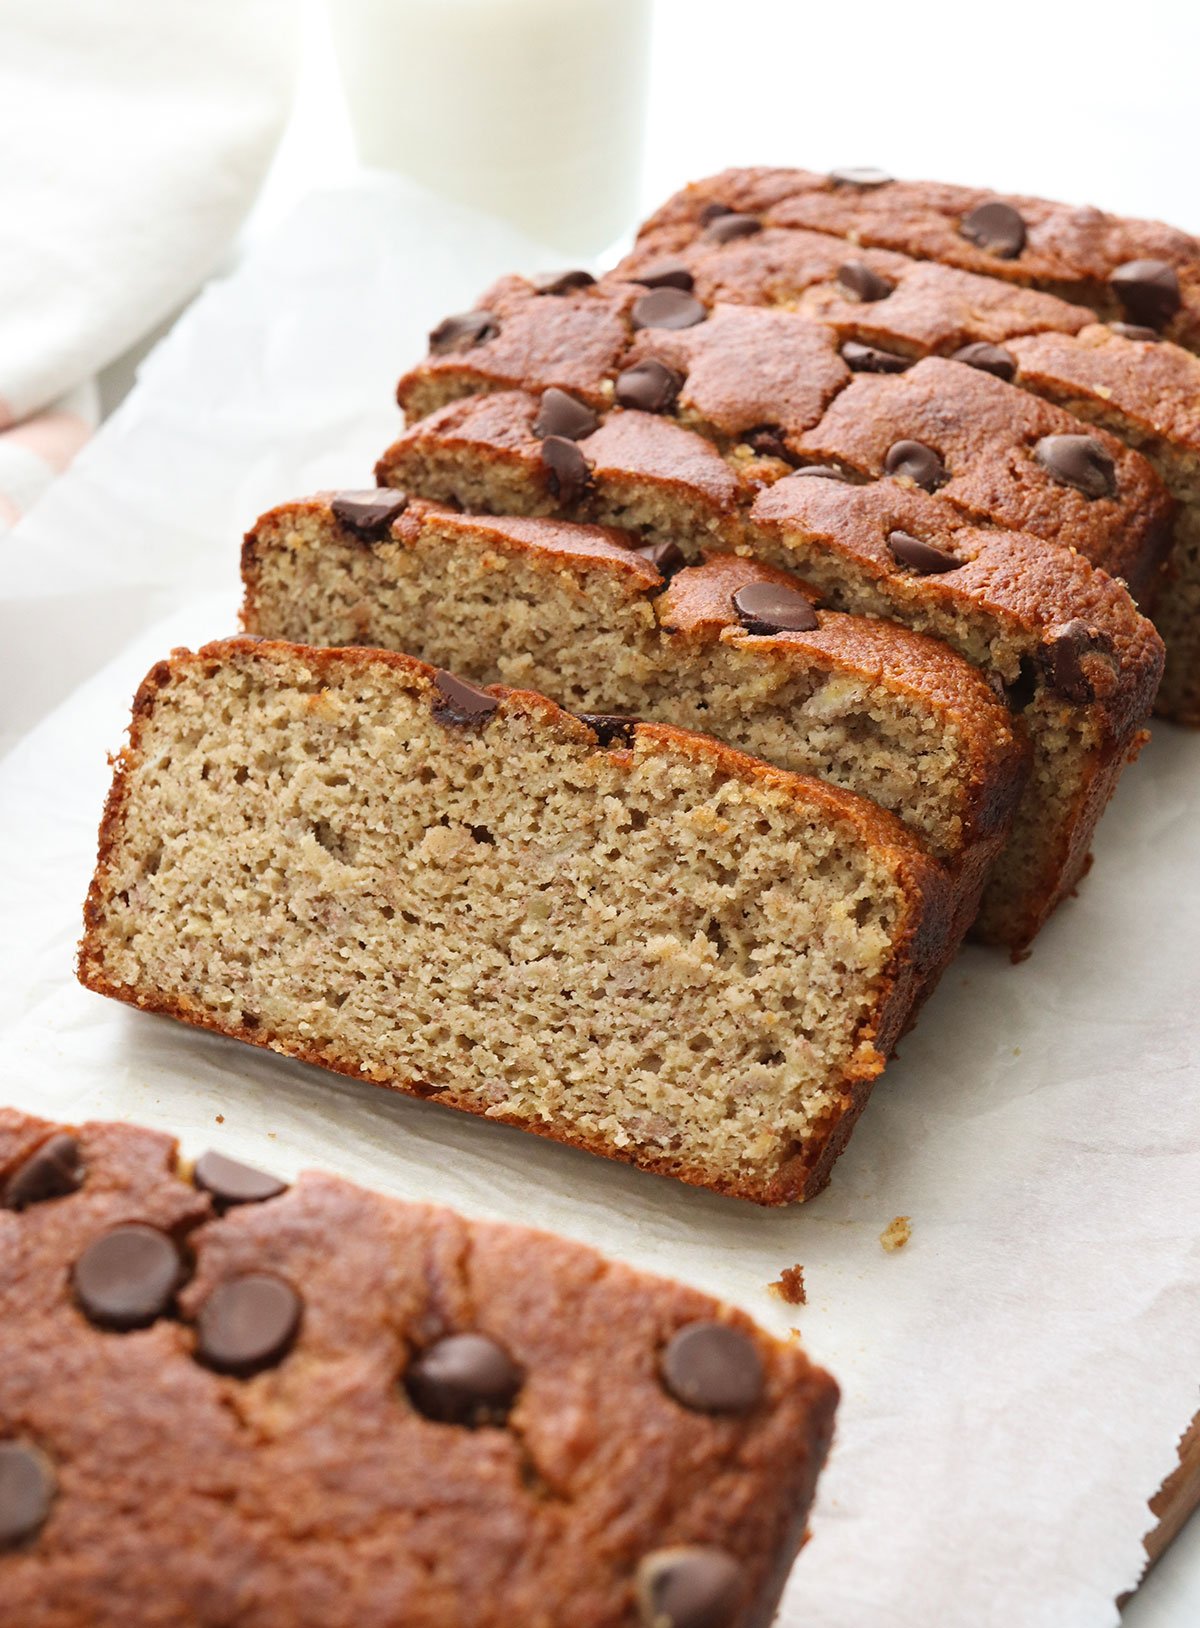 banana bread sliced on parchment paper.